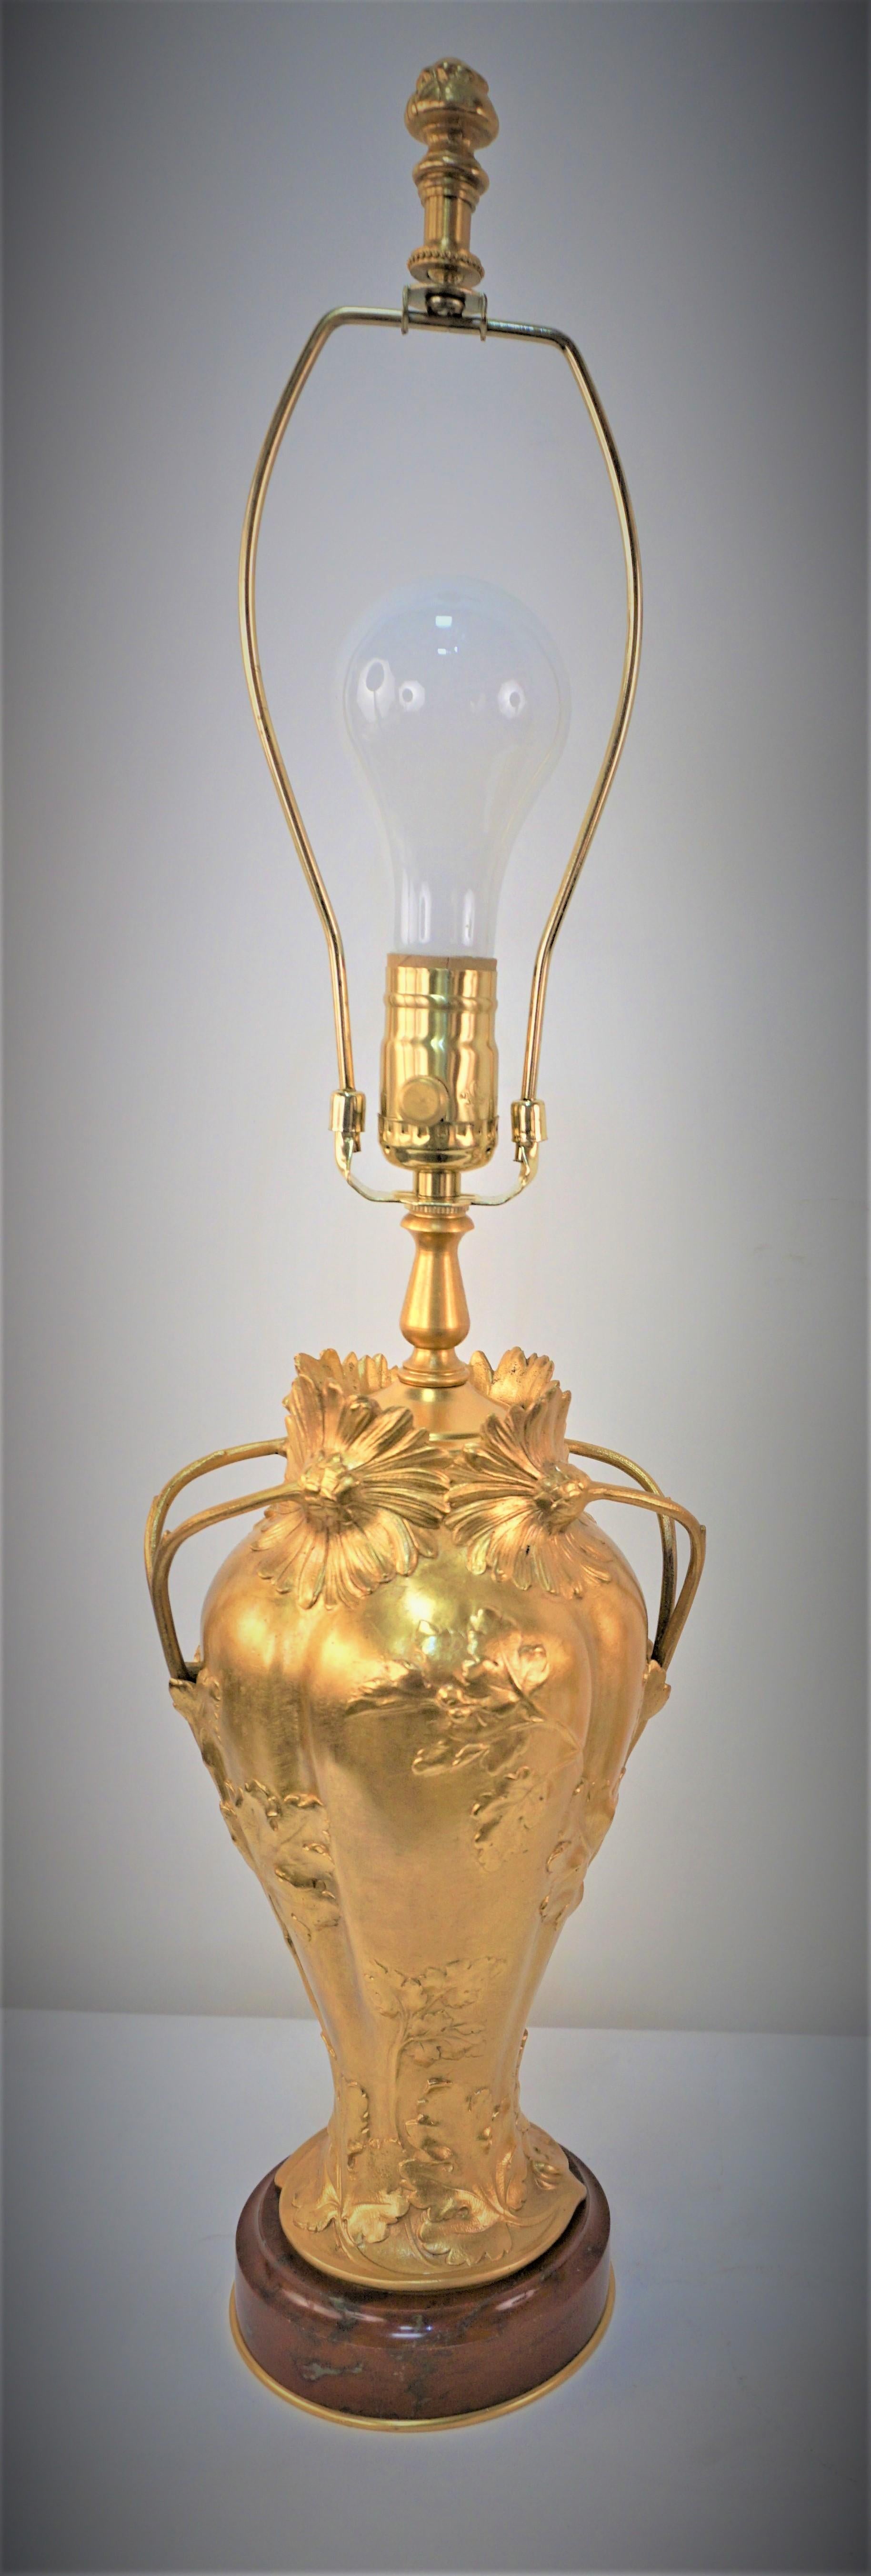 French Pair of Gilt Bonze Table Lamps by Ernest Sanglan, Thiébaut Freres For Sale